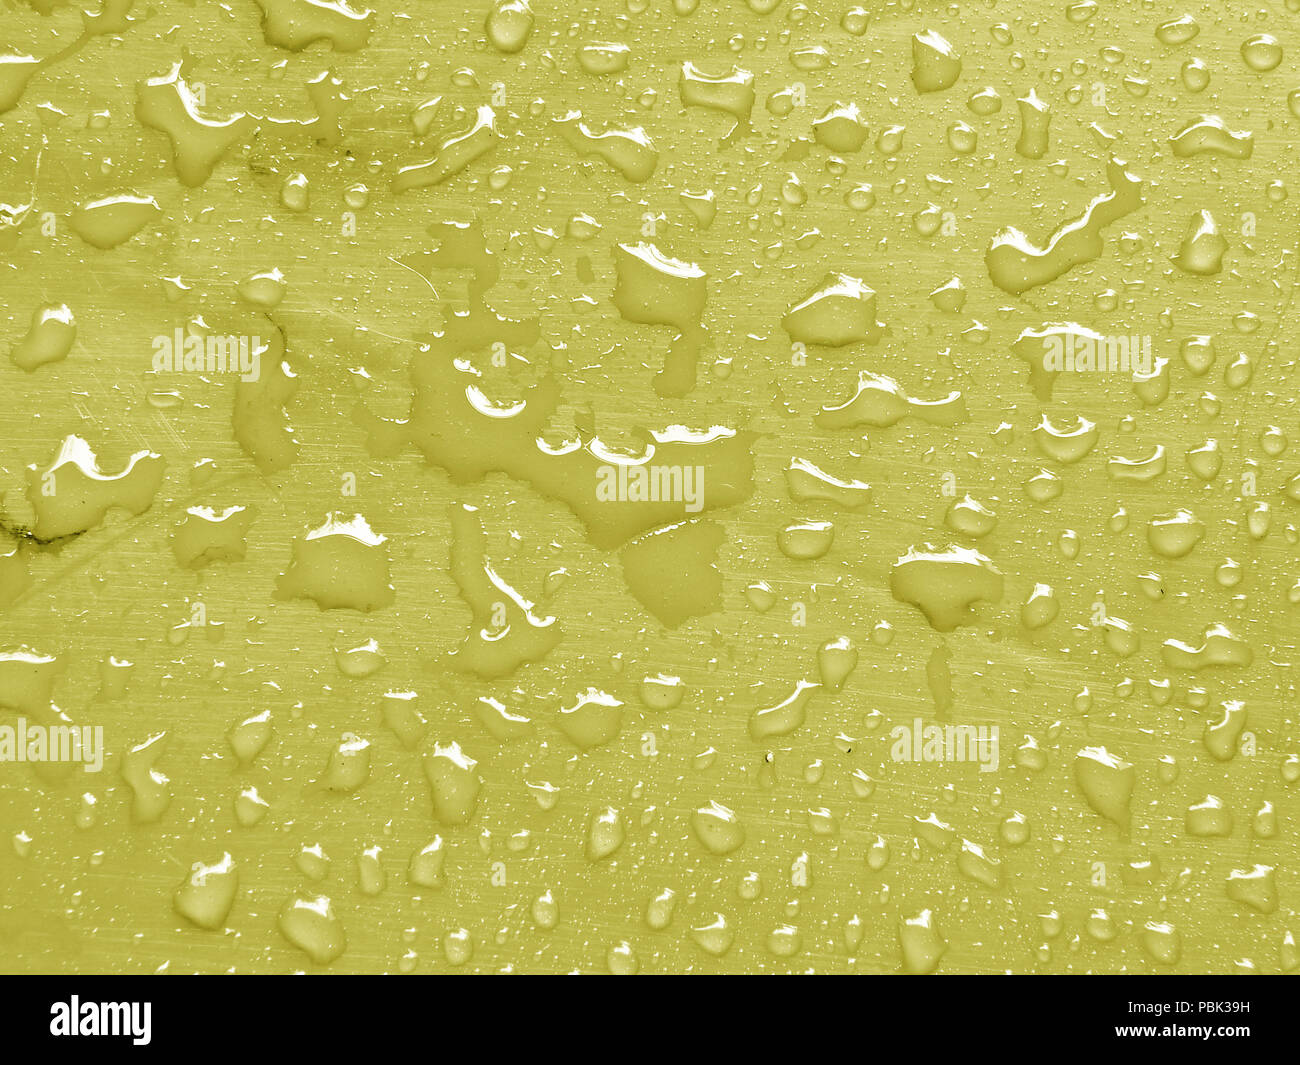 water drops on limelight colored metallic surface Stock Photo